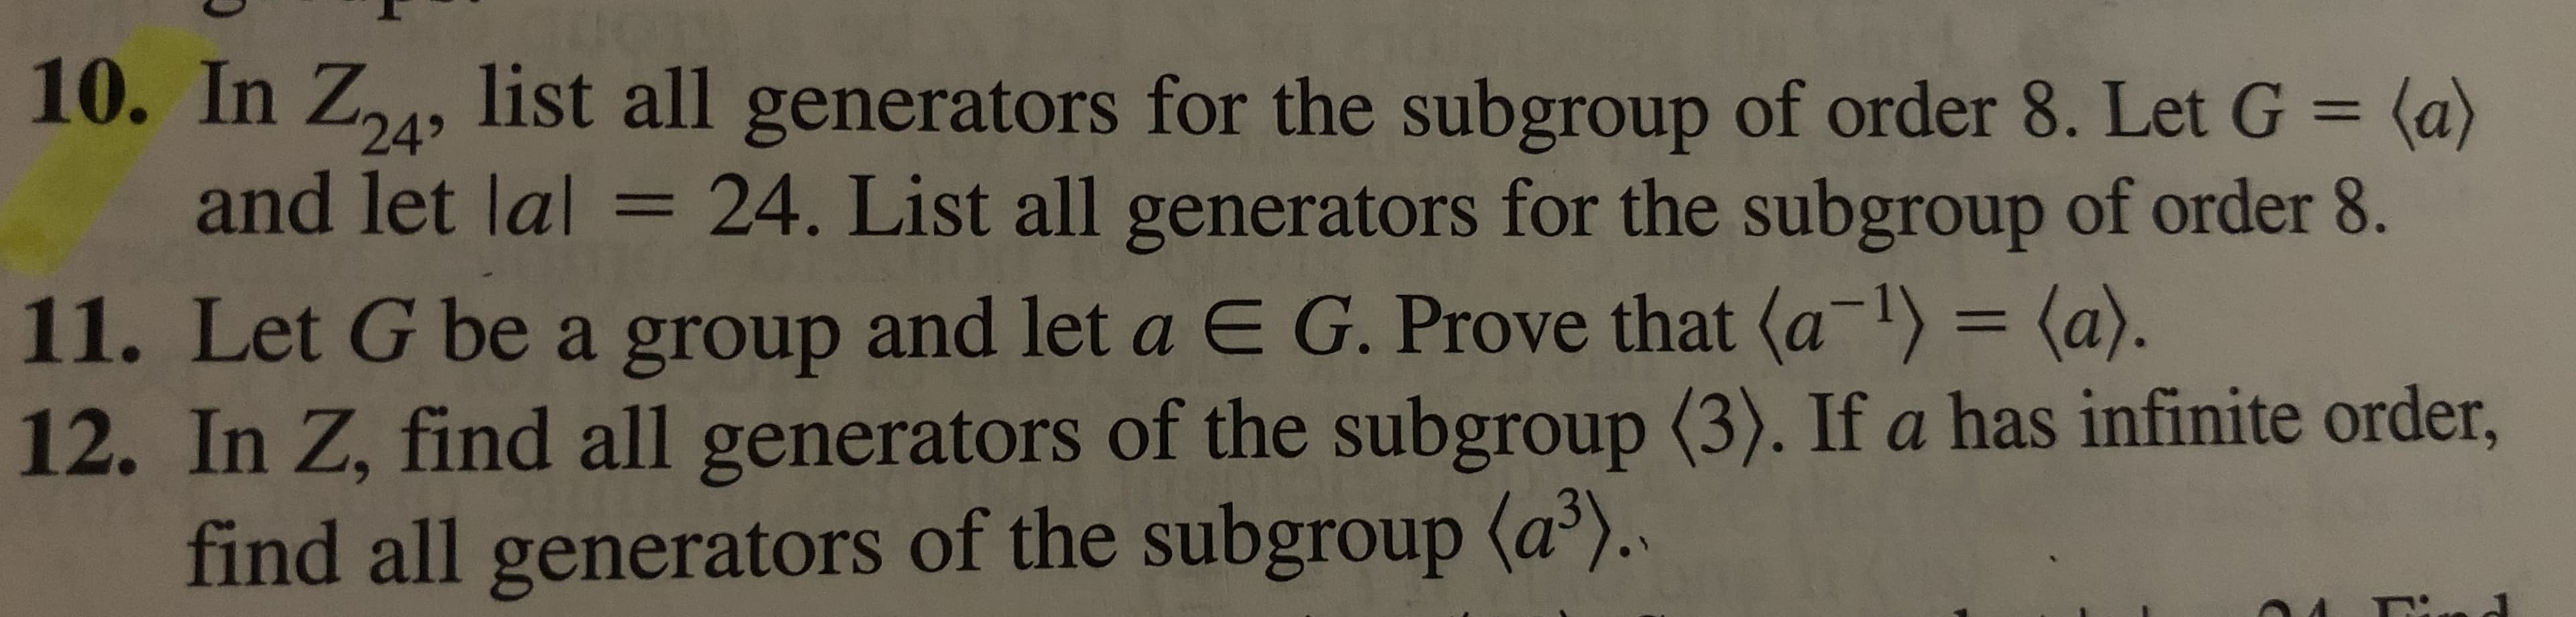 10. In Z24, list all generators for the subgroup of order 8. Let G (a)
and let lal = 24. List all generators for the subgroup of order 8.
11. Let G be a group and let a E G. Prove that (a) = (a).
12. In Z, find all generators of the subgroup (3). If a has infinite order,
find all generators of the subgroup (a).
